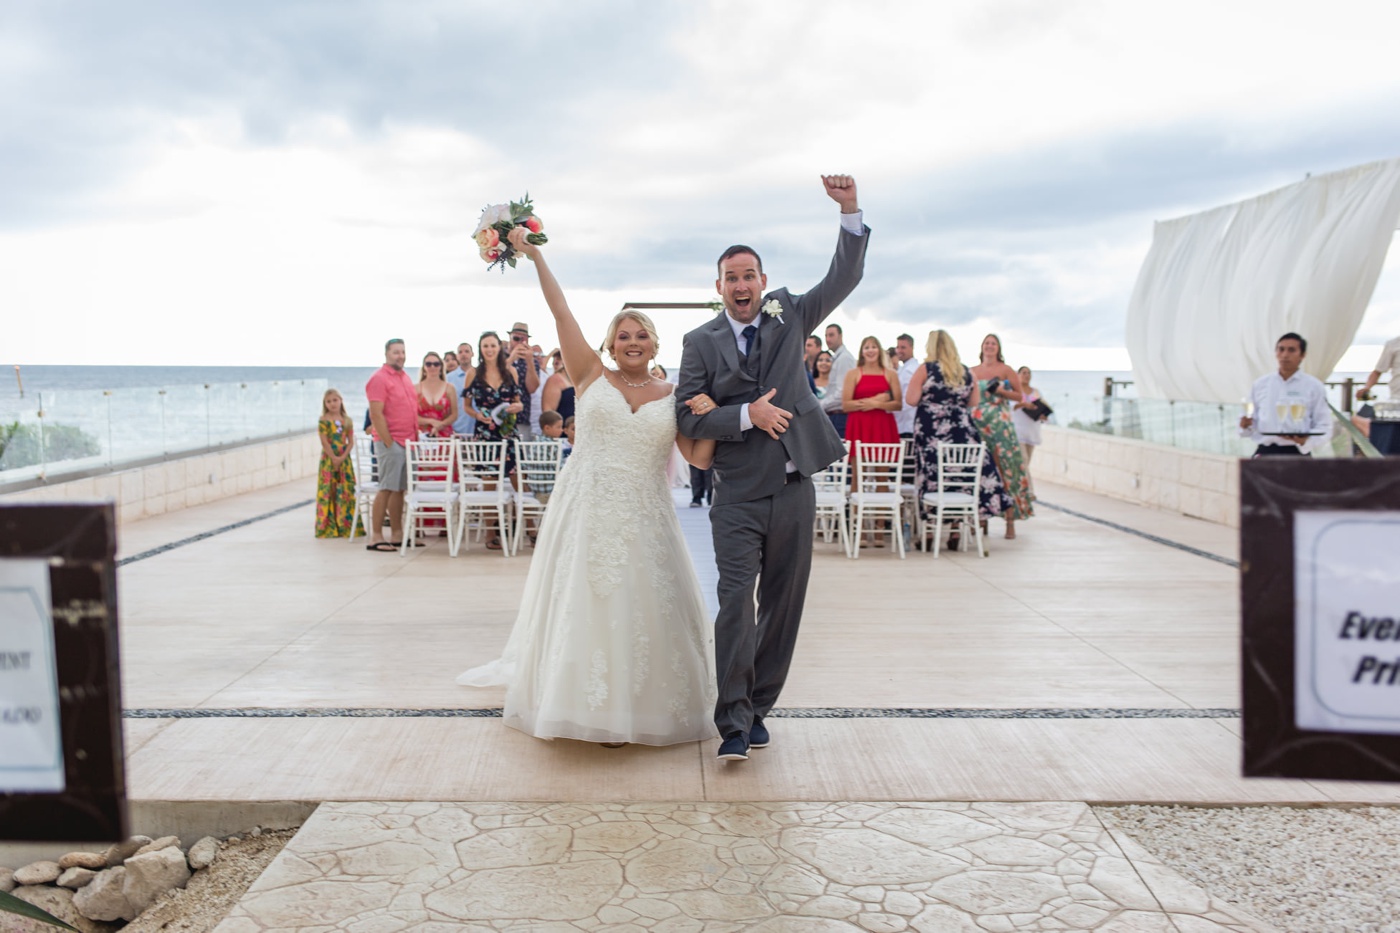 Cost of a destination wedding at an all-inclusive resort